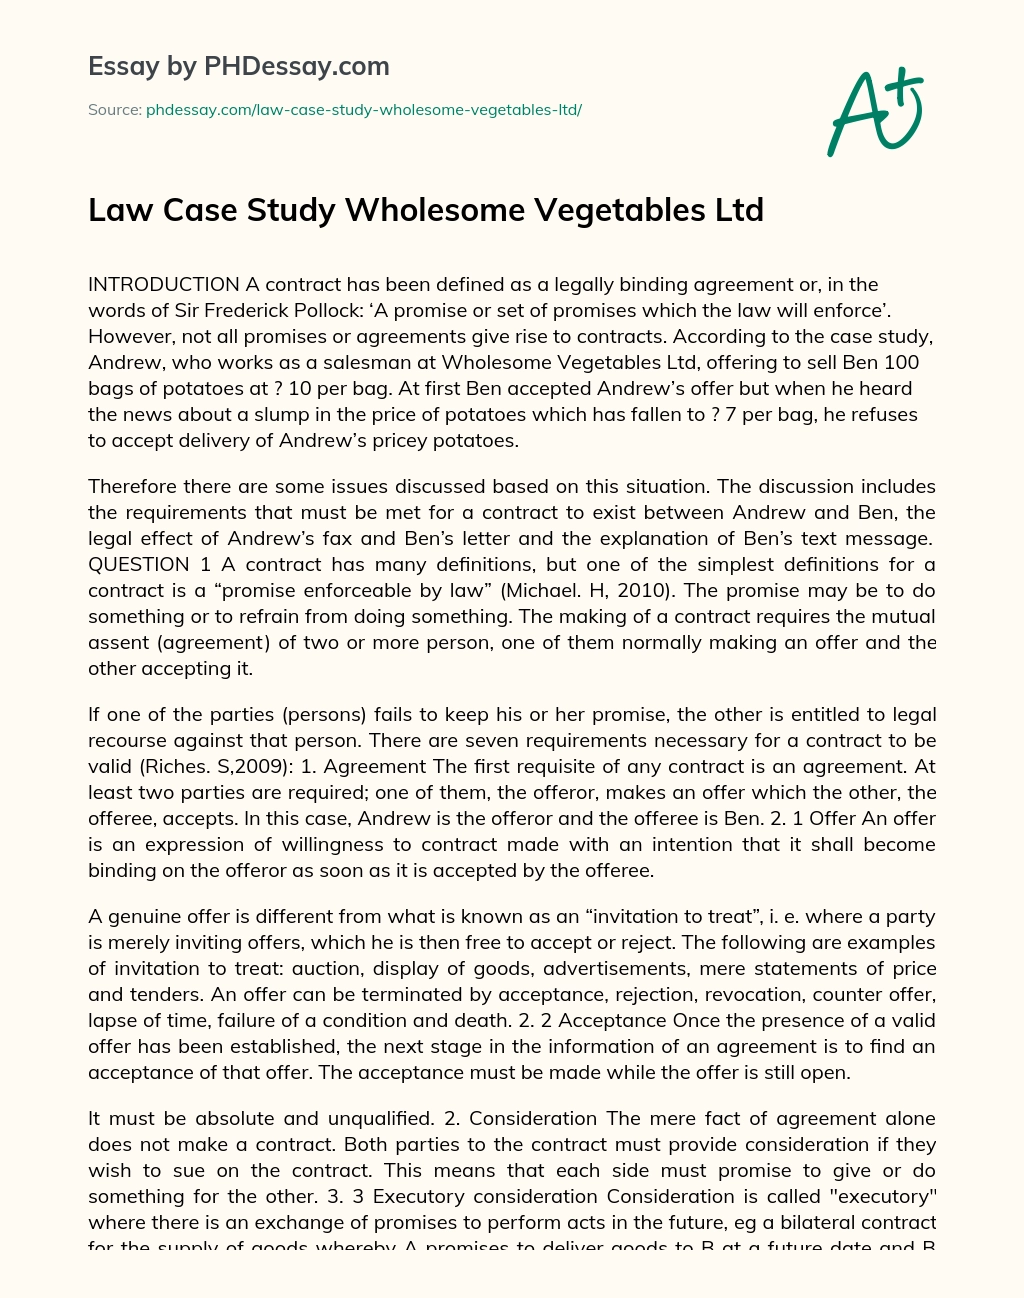 Law Case Study Wholesome Vegetables Ltd essay